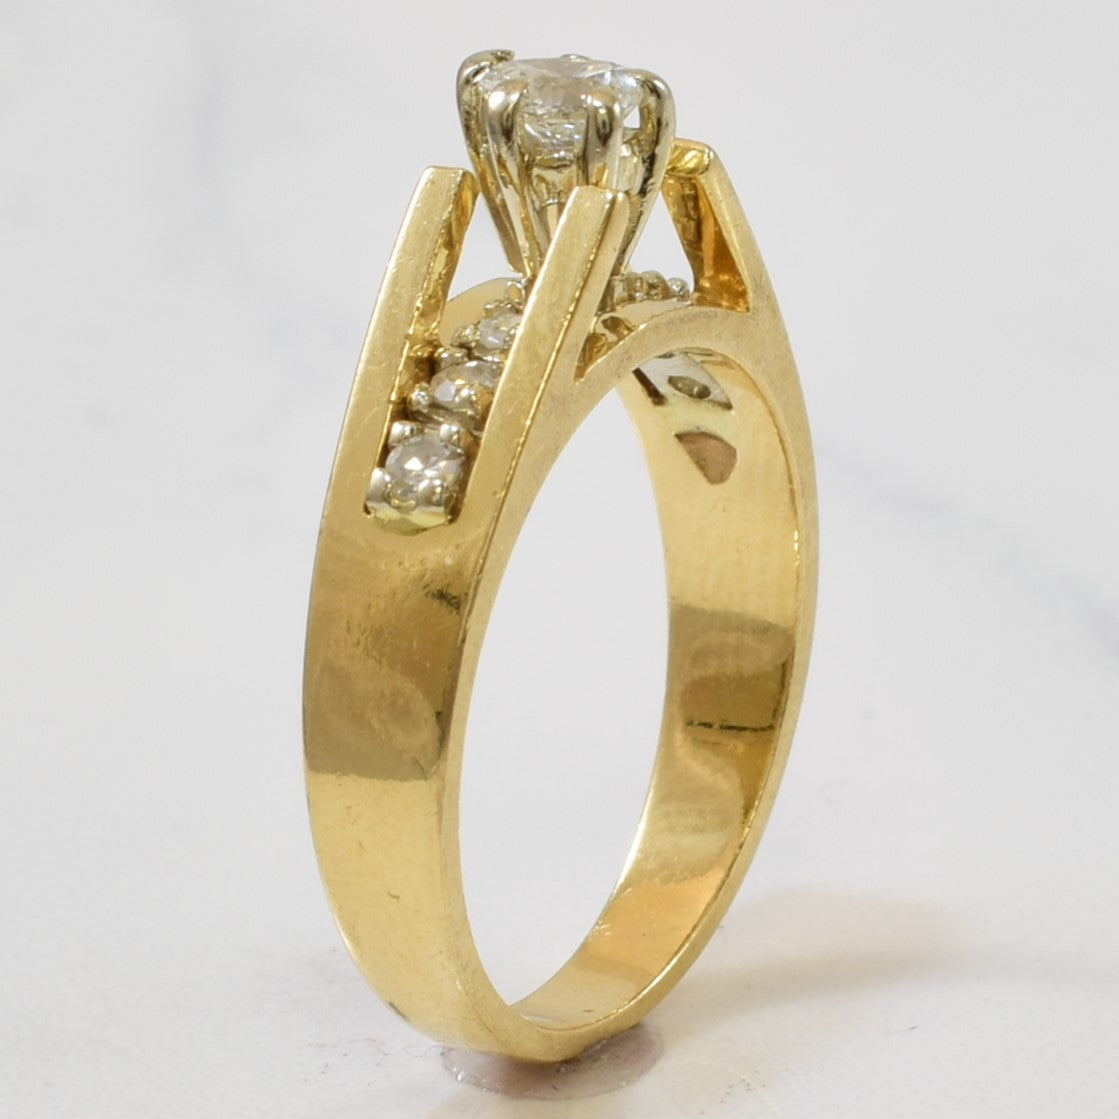 Cathedral Pear Diamond Ring | 0.19ct, 0.12ctw | SZ 6 |